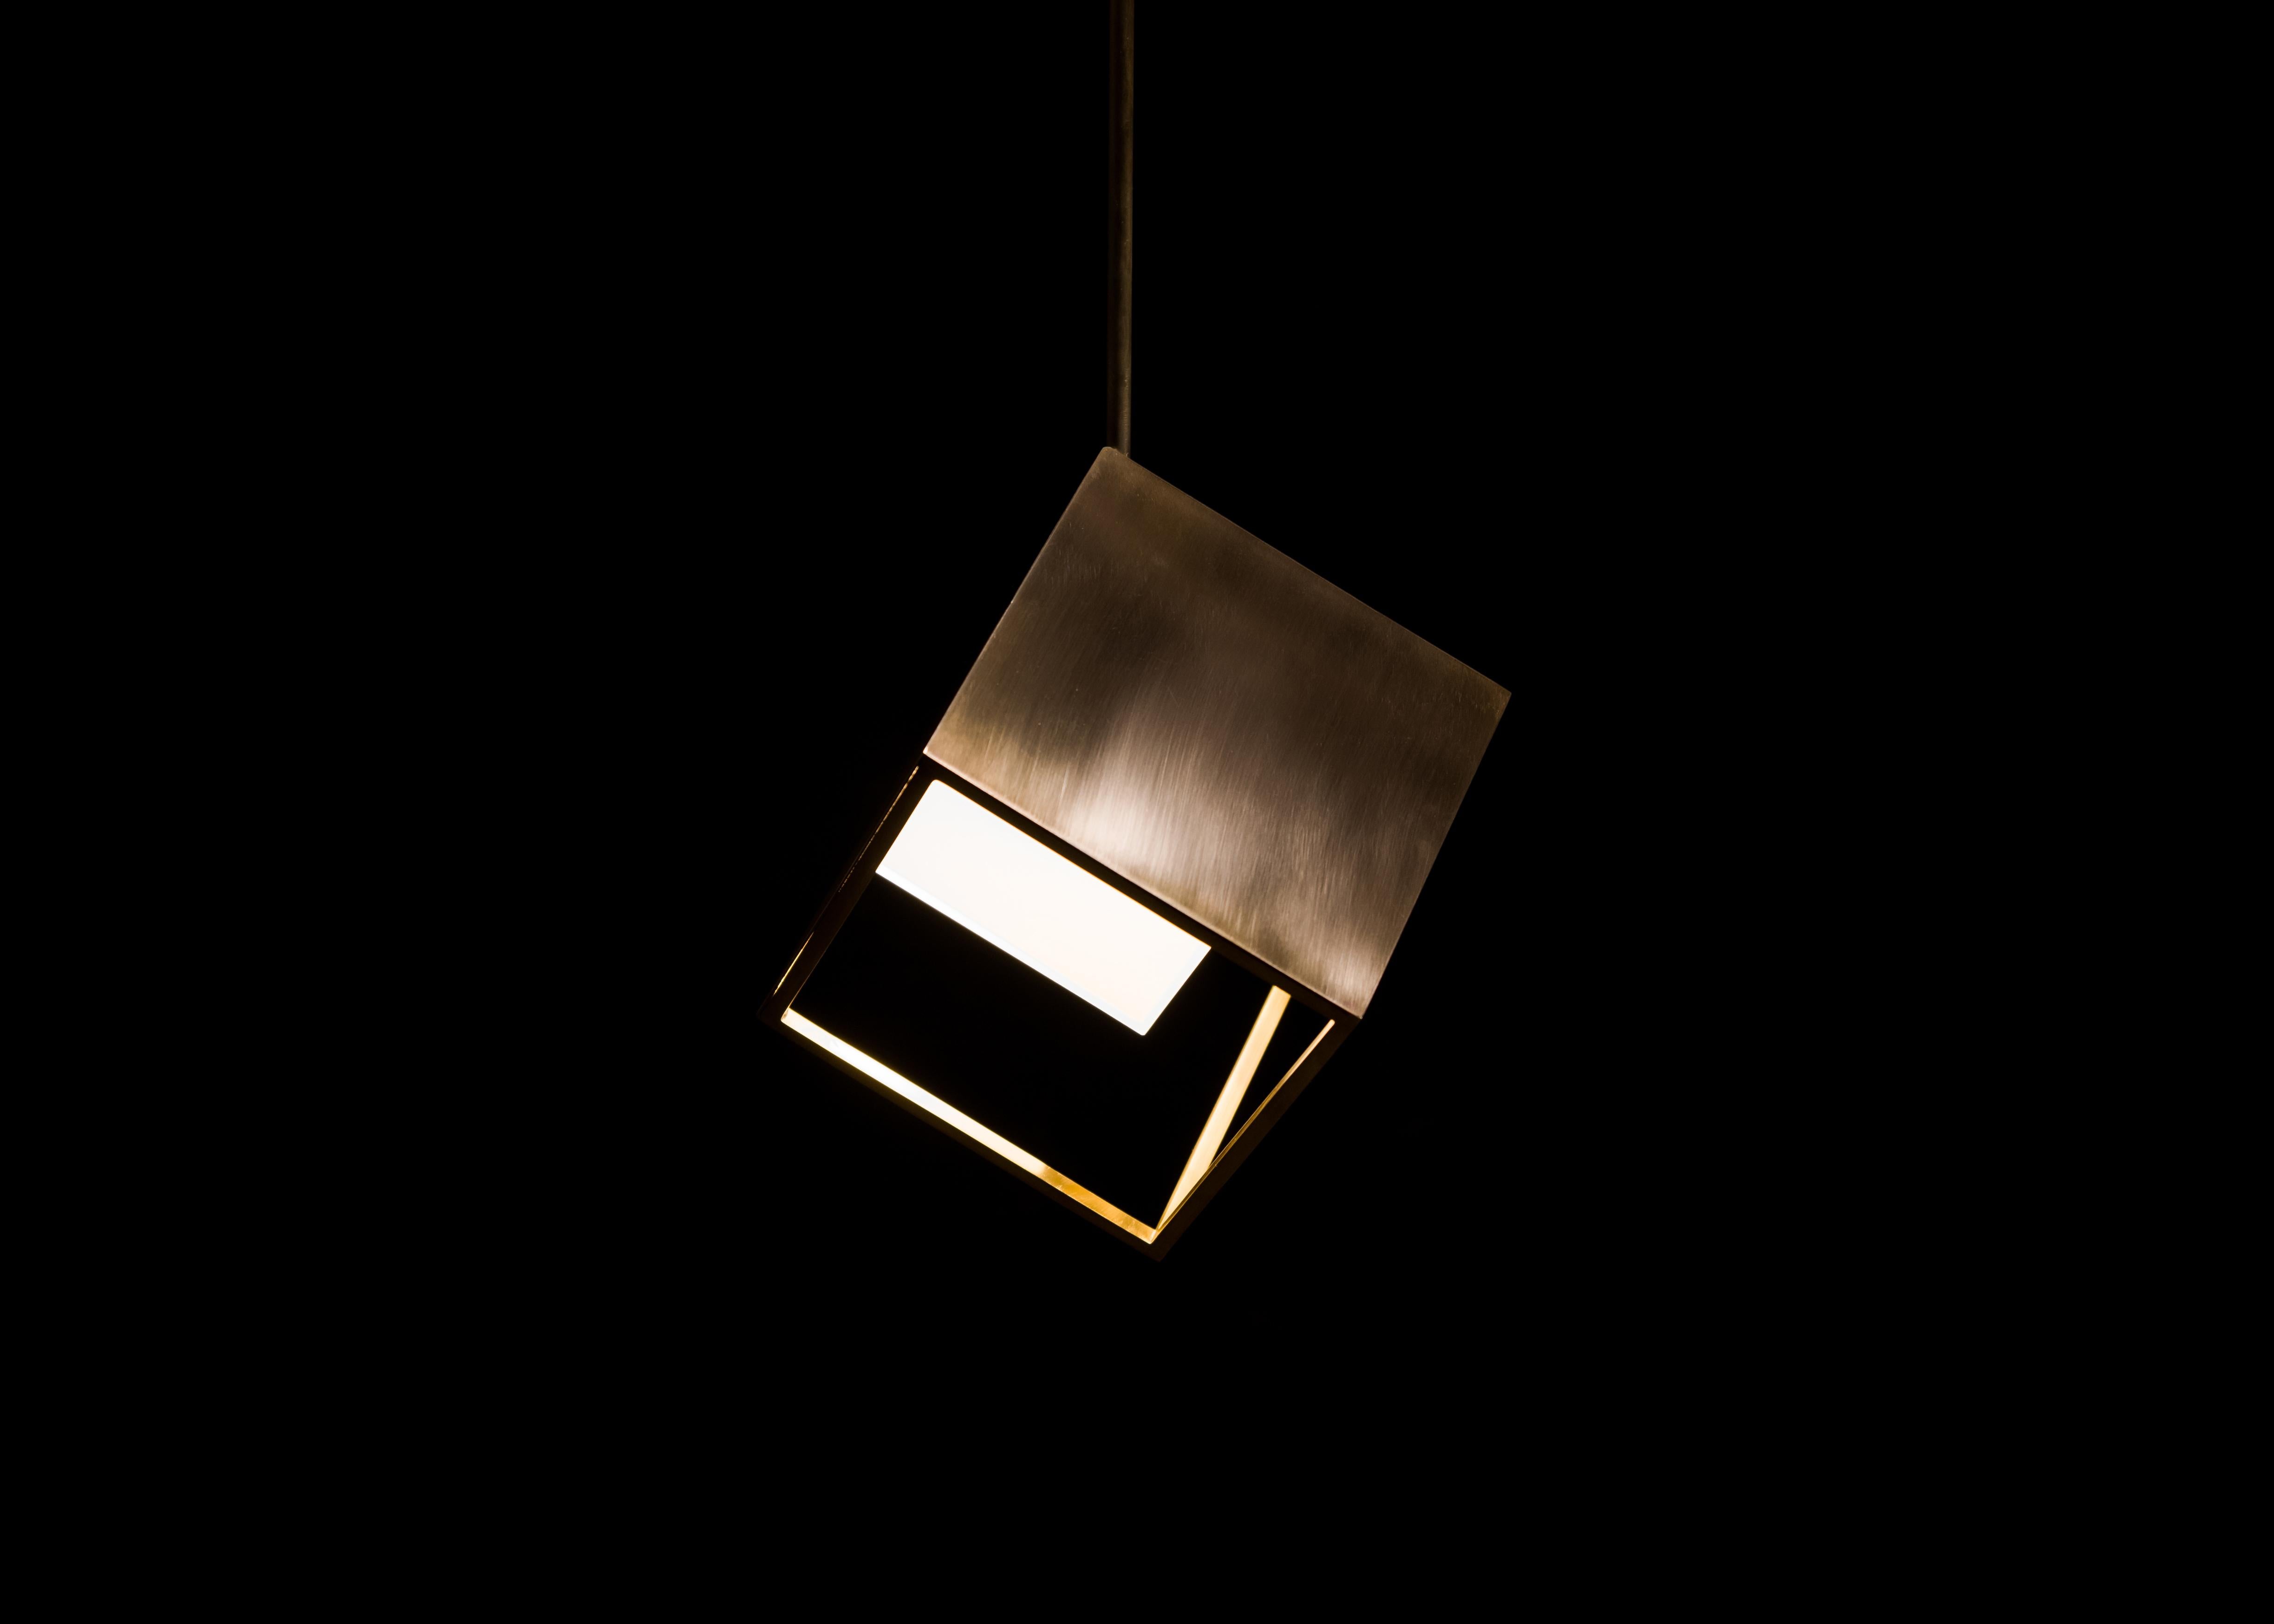 Unis by Diaphan Studio.

Unis is the unit cell of the Isos collection. It is inspired by the simplest and most common shape found in crystals and minerals, the cube. The geometry of the brass pendant is characterised by a thin frame, and it is